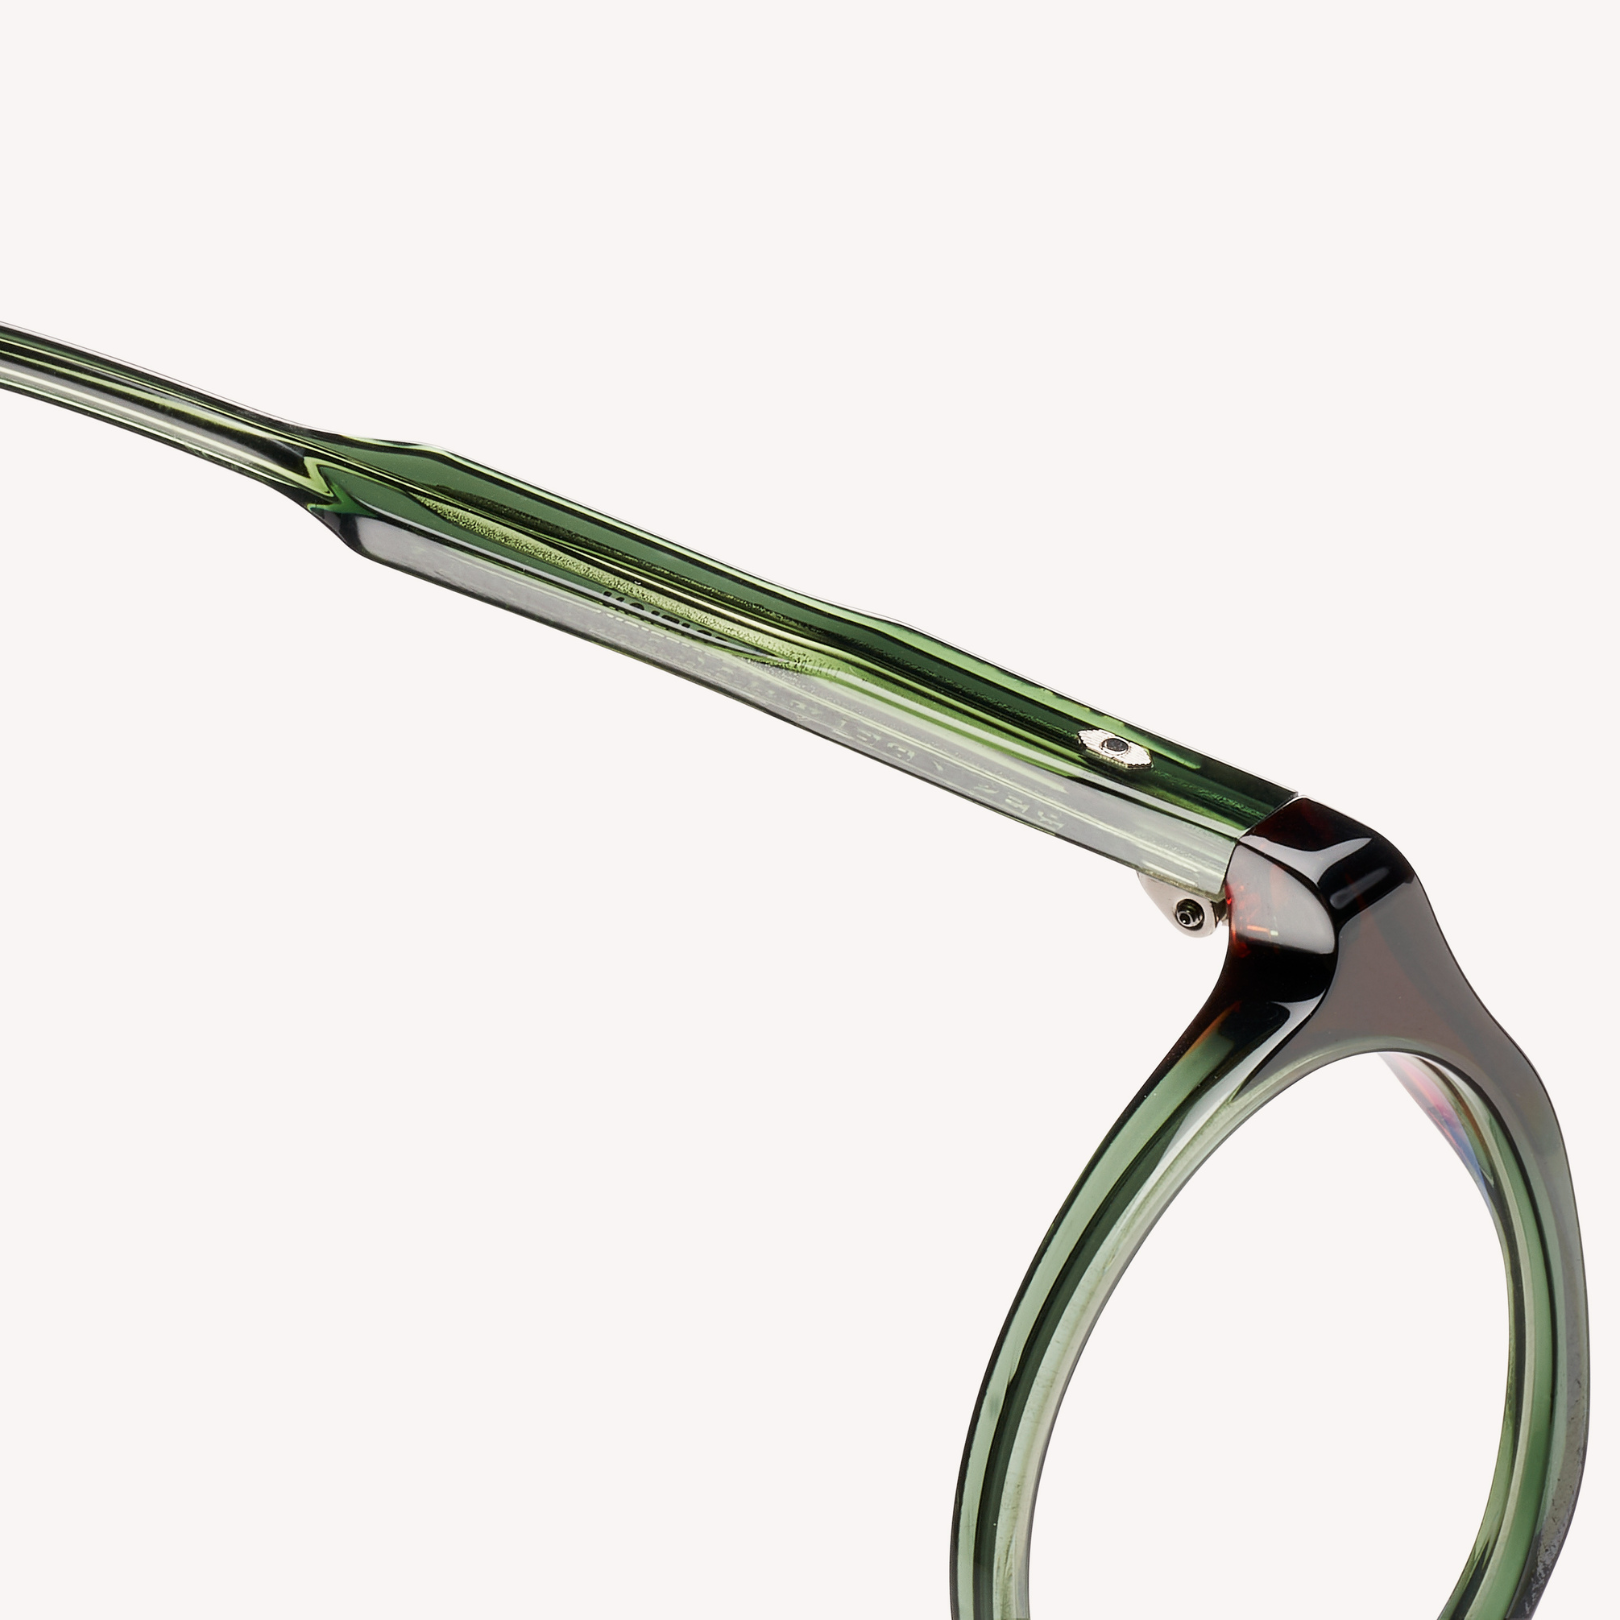 Res Rei collab Frames &amp; Glass - Pelle